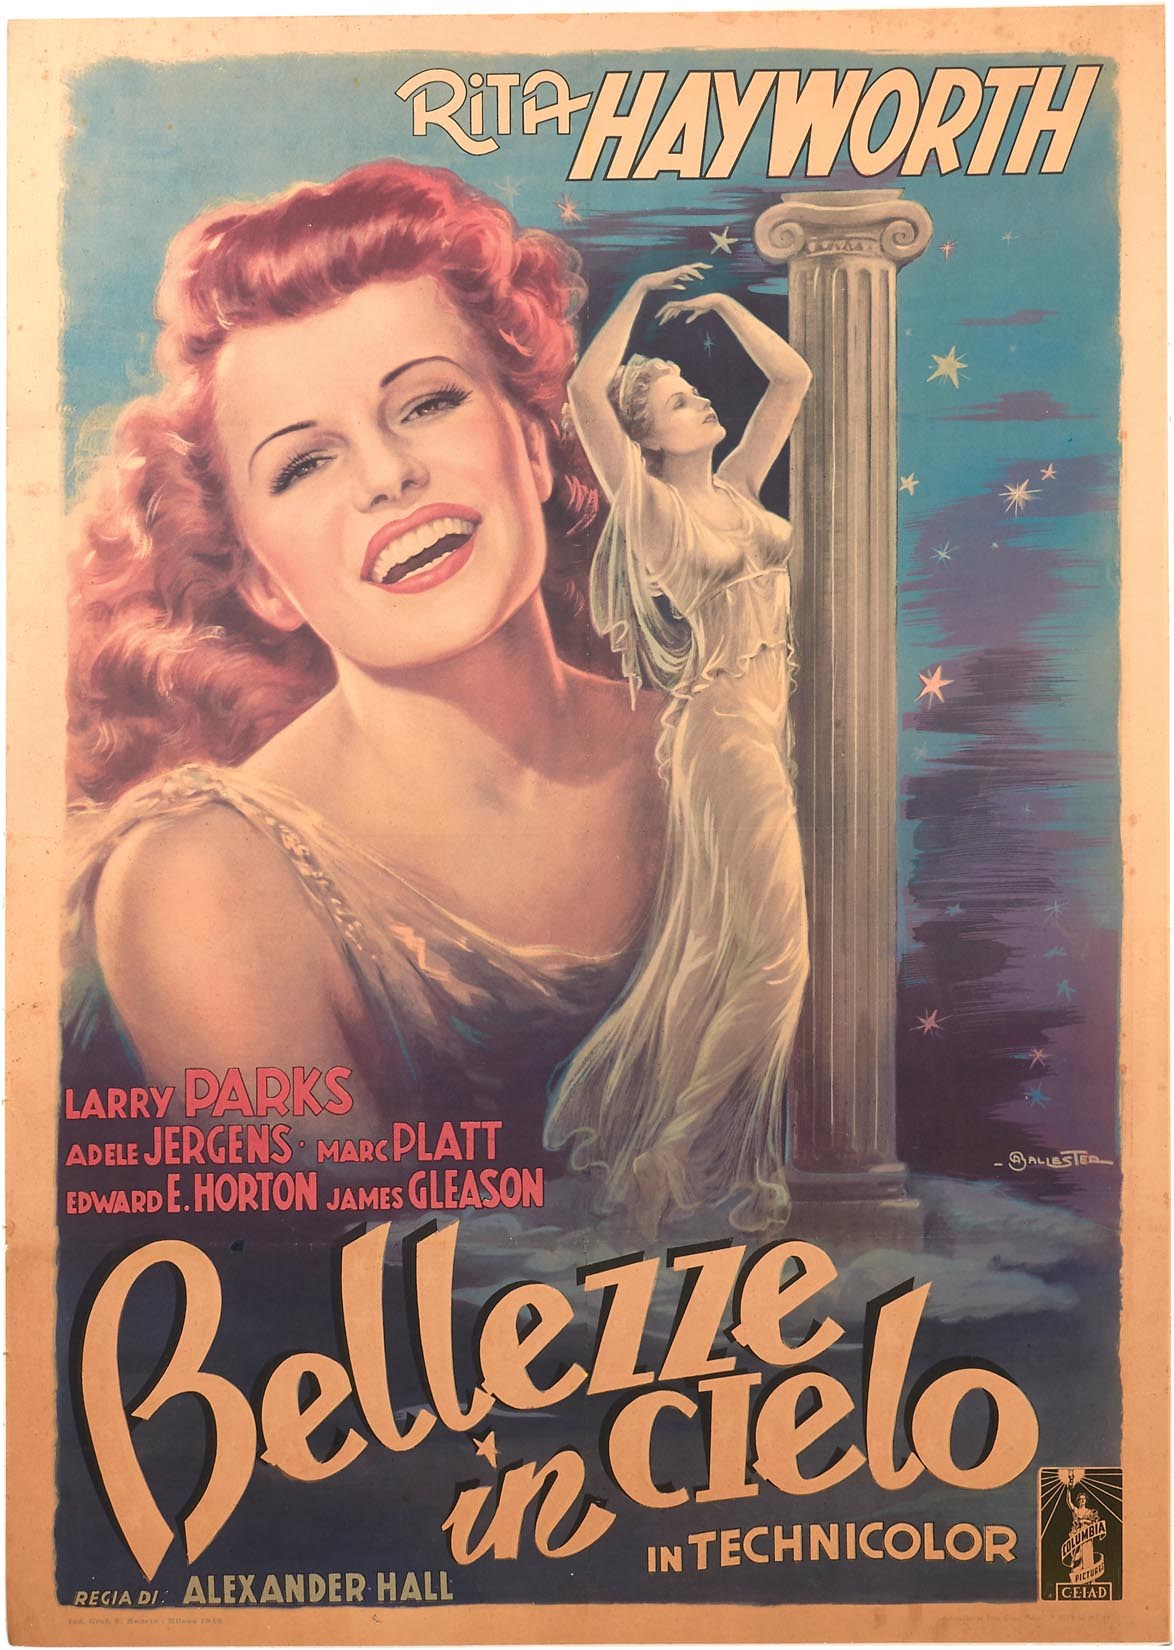 Rock And Pop Culture - 1947 Rita Hayworth "Down to Earth" (Bellezze in Cielo) Movie Poster